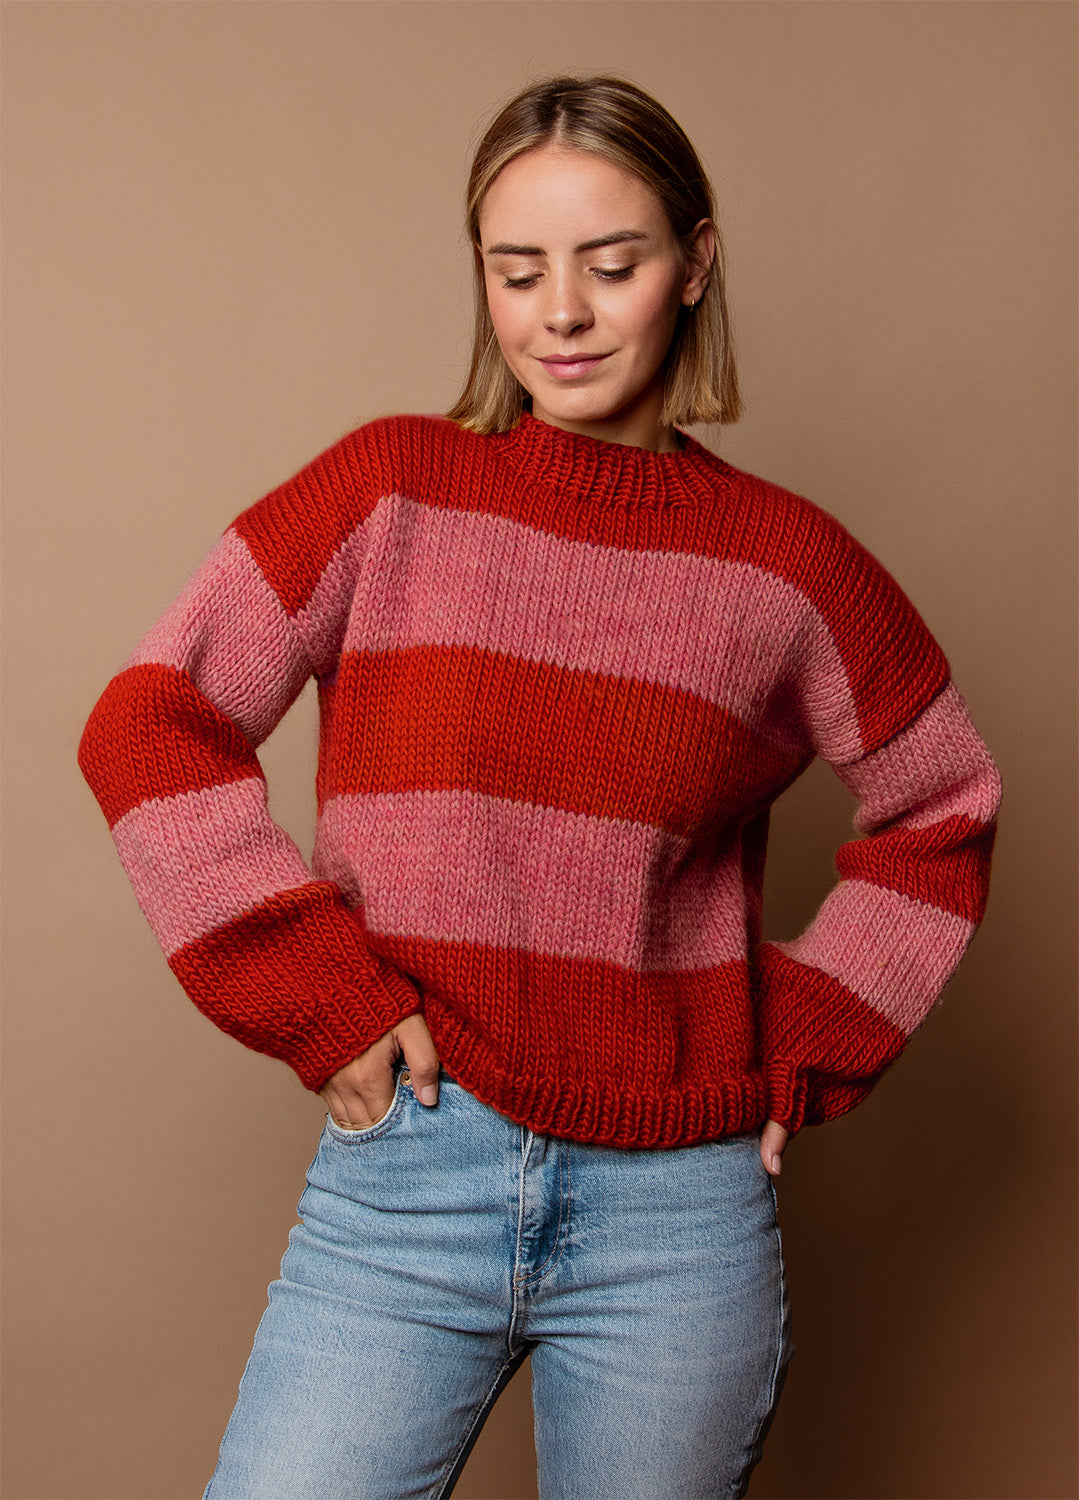 Sweater & Jumper kits for all levels, Wool and the Gang